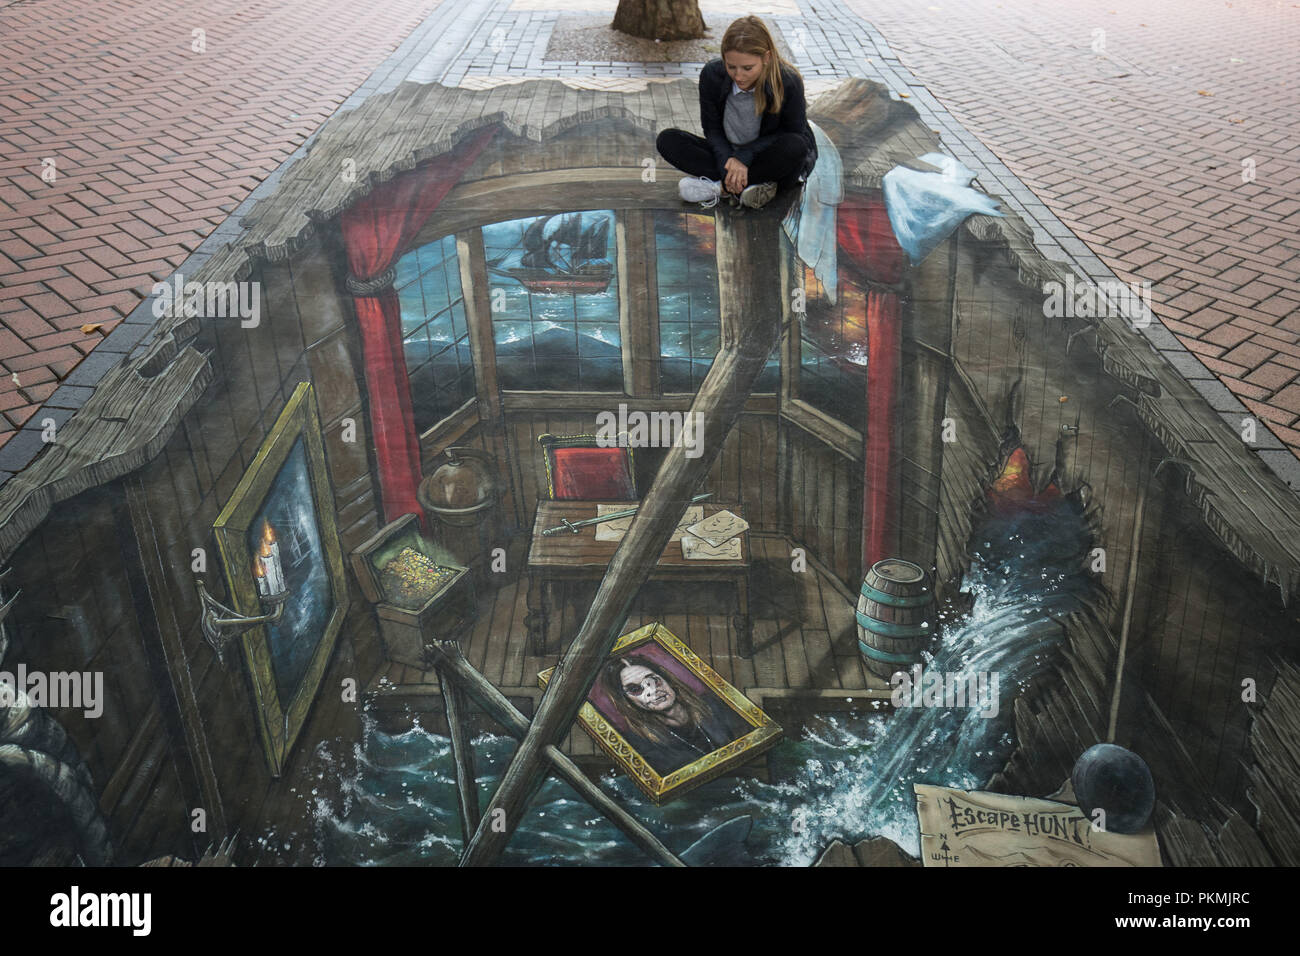 Jessica Rose sits atop a 3D anamorphic canvas art work along Upper New Street, Birmingham. Stock Photo